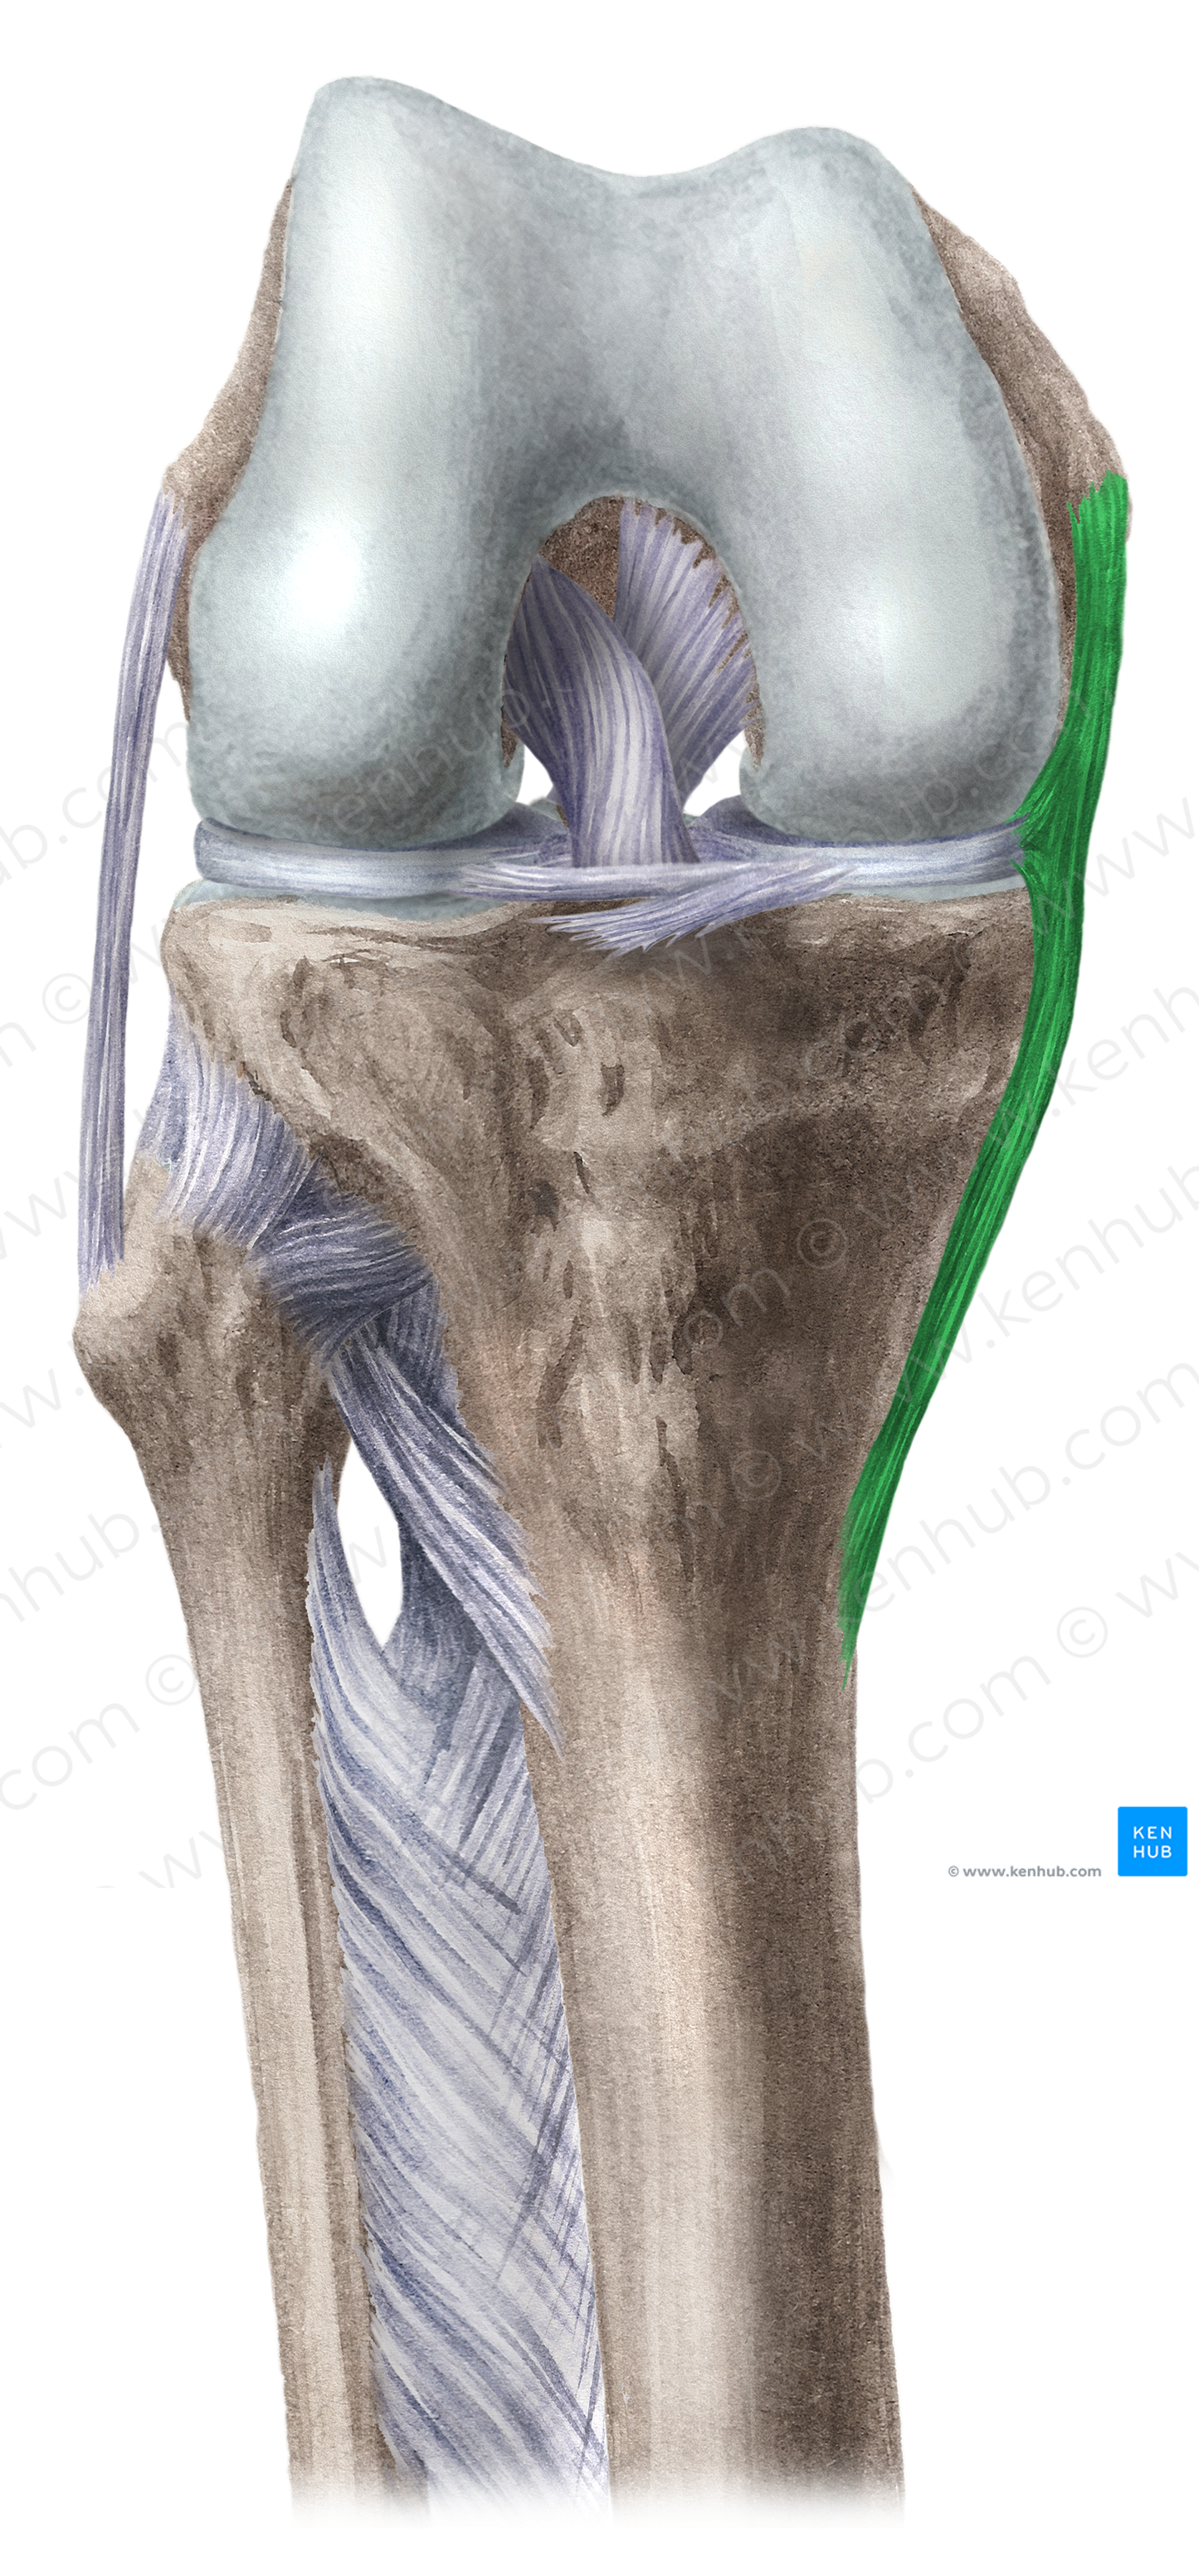 Tibial collateral ligament of knee joint (#4498)